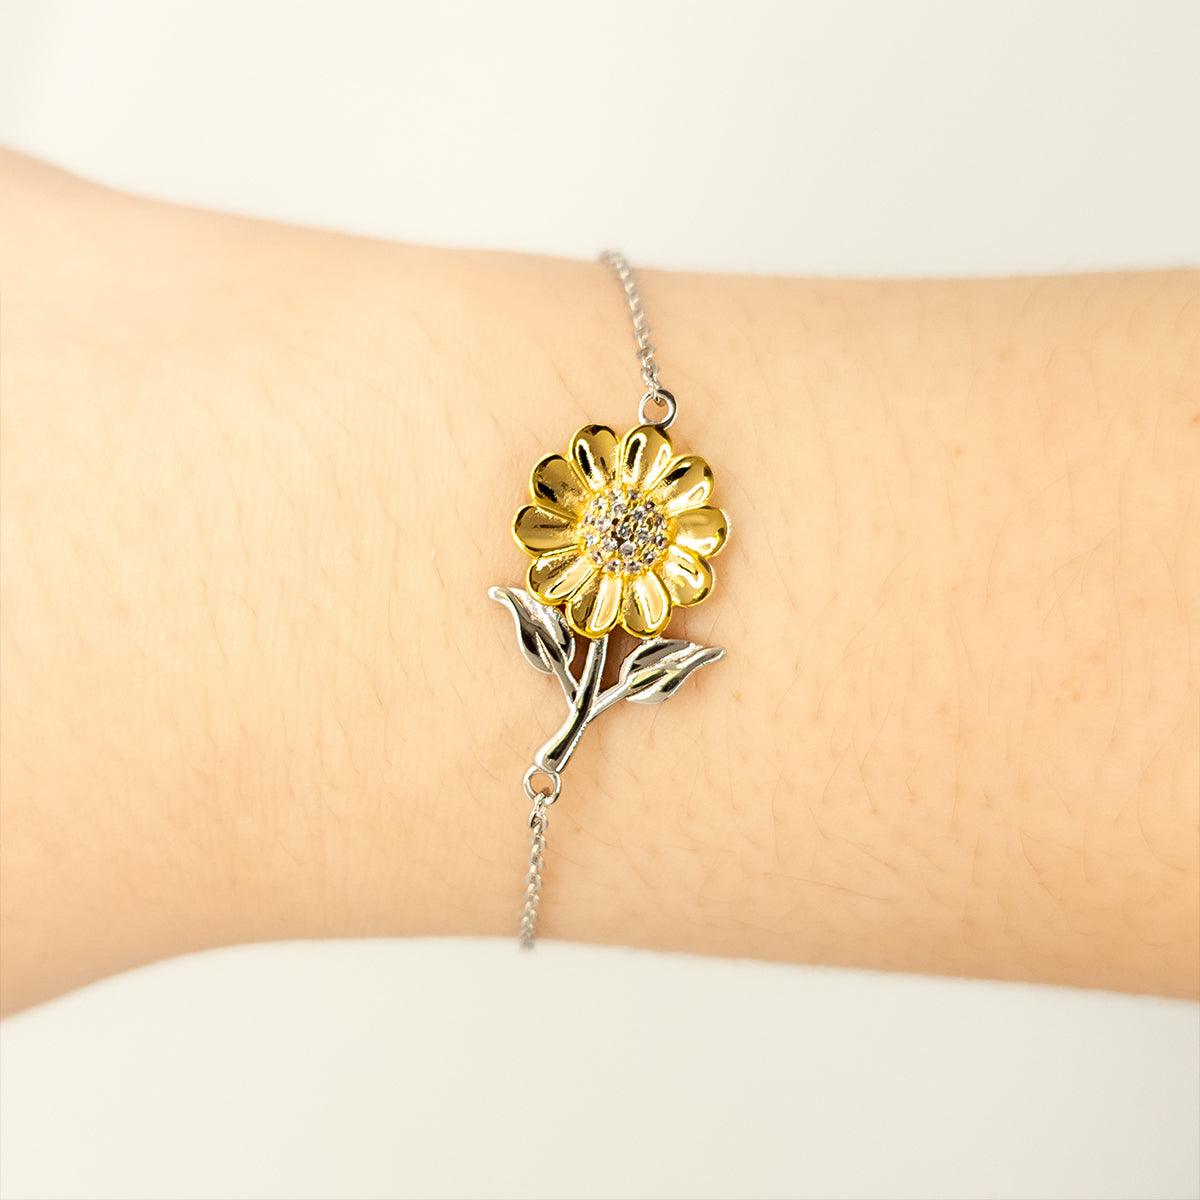 Graphic Designer Sunflower Bracelet - Thanks for being who you are - Birthday Christmas Jewelry Gifts Coworkers Colleague Boss - Mallard Moon Gift Shop